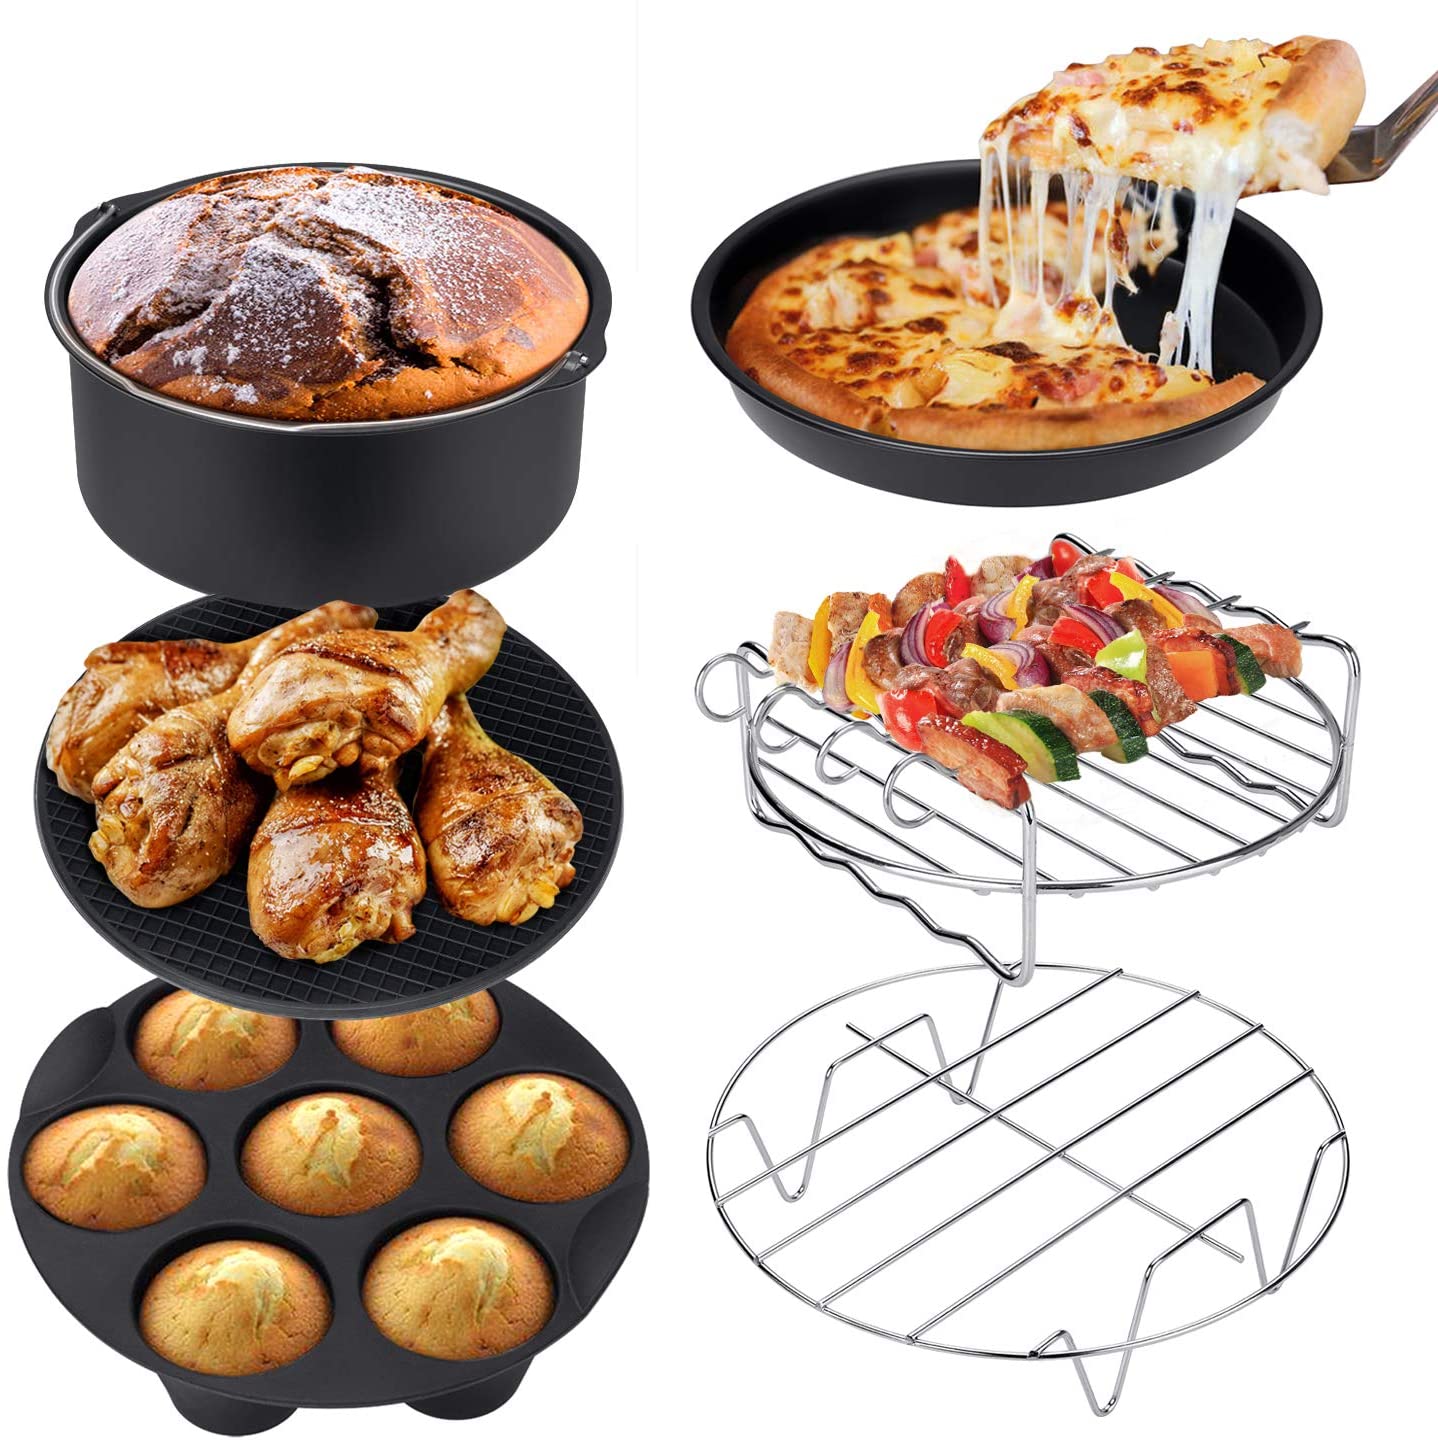 Air Fryer Accessories Set Baking Basket Pizza Plate Grill Pot Kitchen Cooking Tool 7/8/9 Inch Air Deep Fryer Parts High Quality